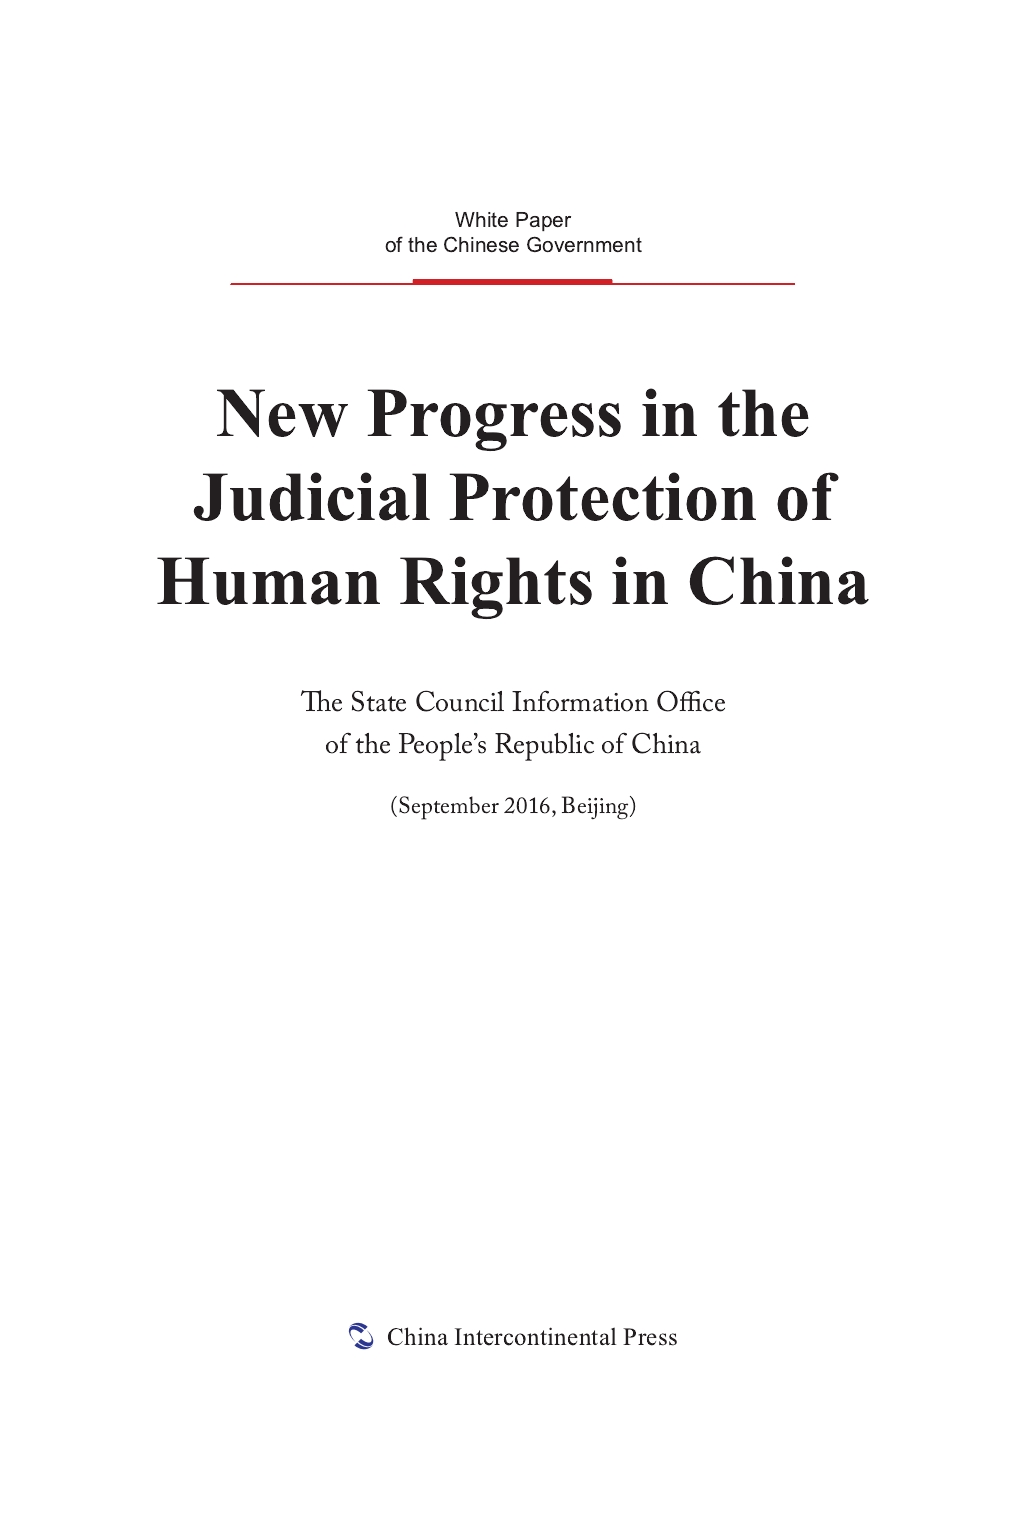 New Progress in the Judicial Protection of Human Rights in China